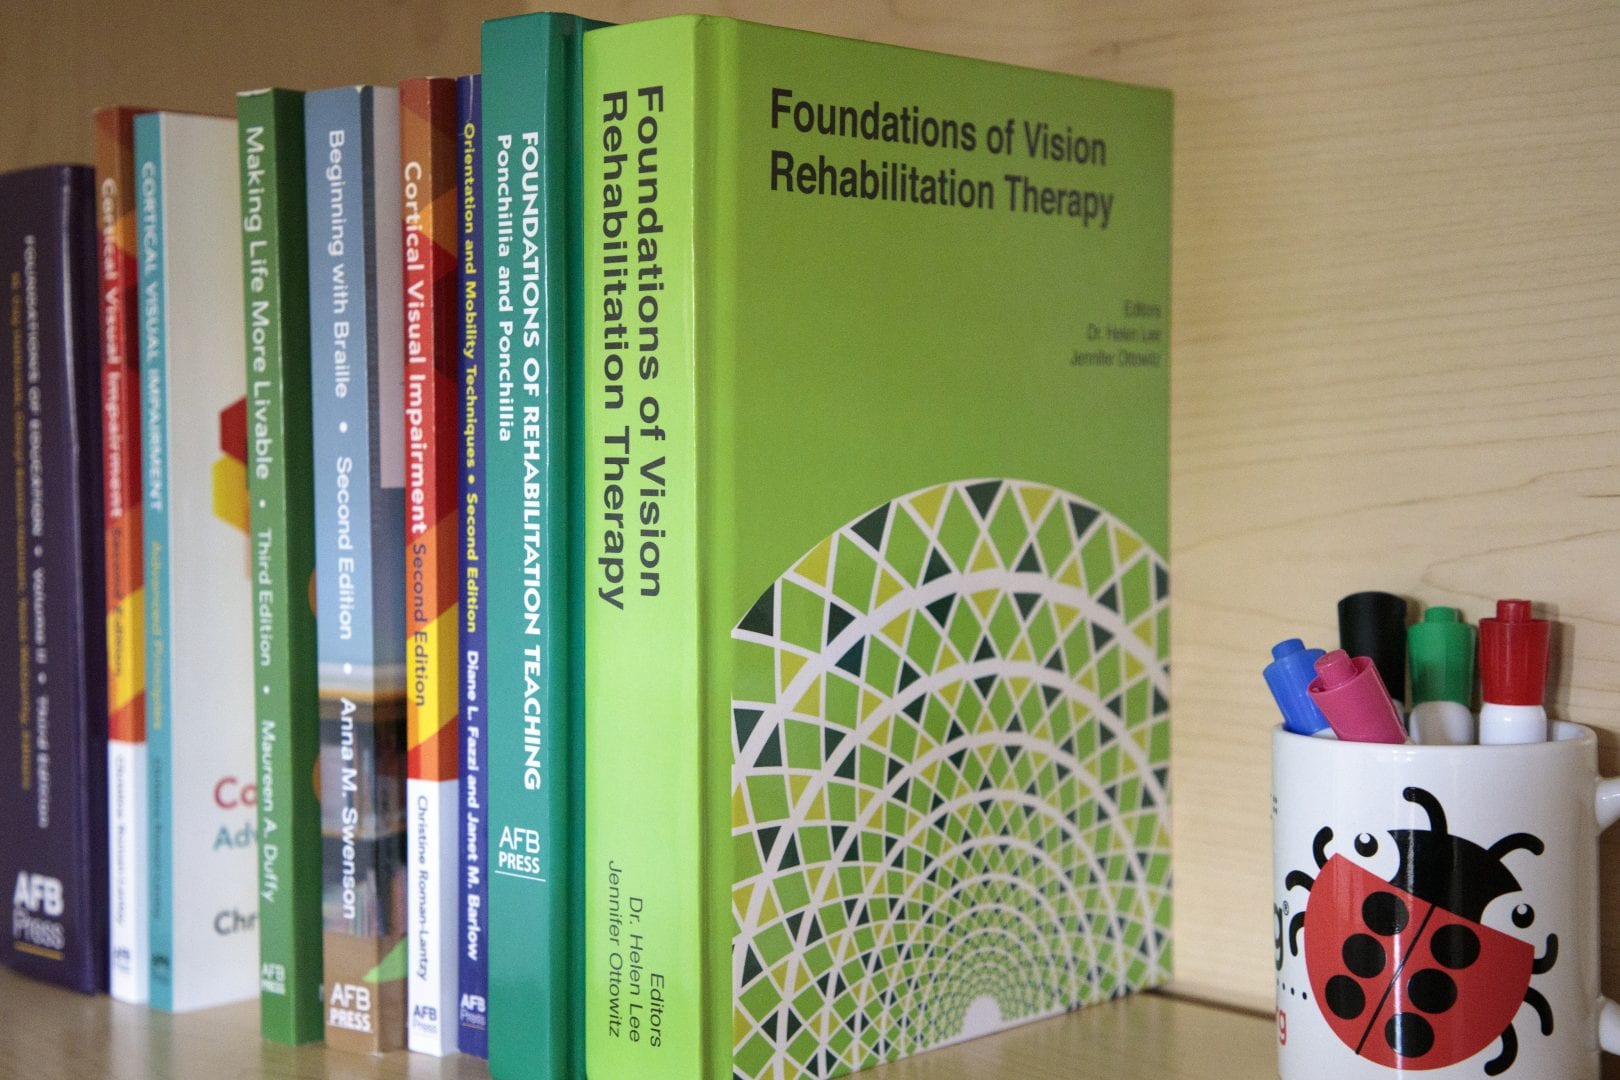 the new foundations of vision rehabilitation therapy book on a shelf with other text books